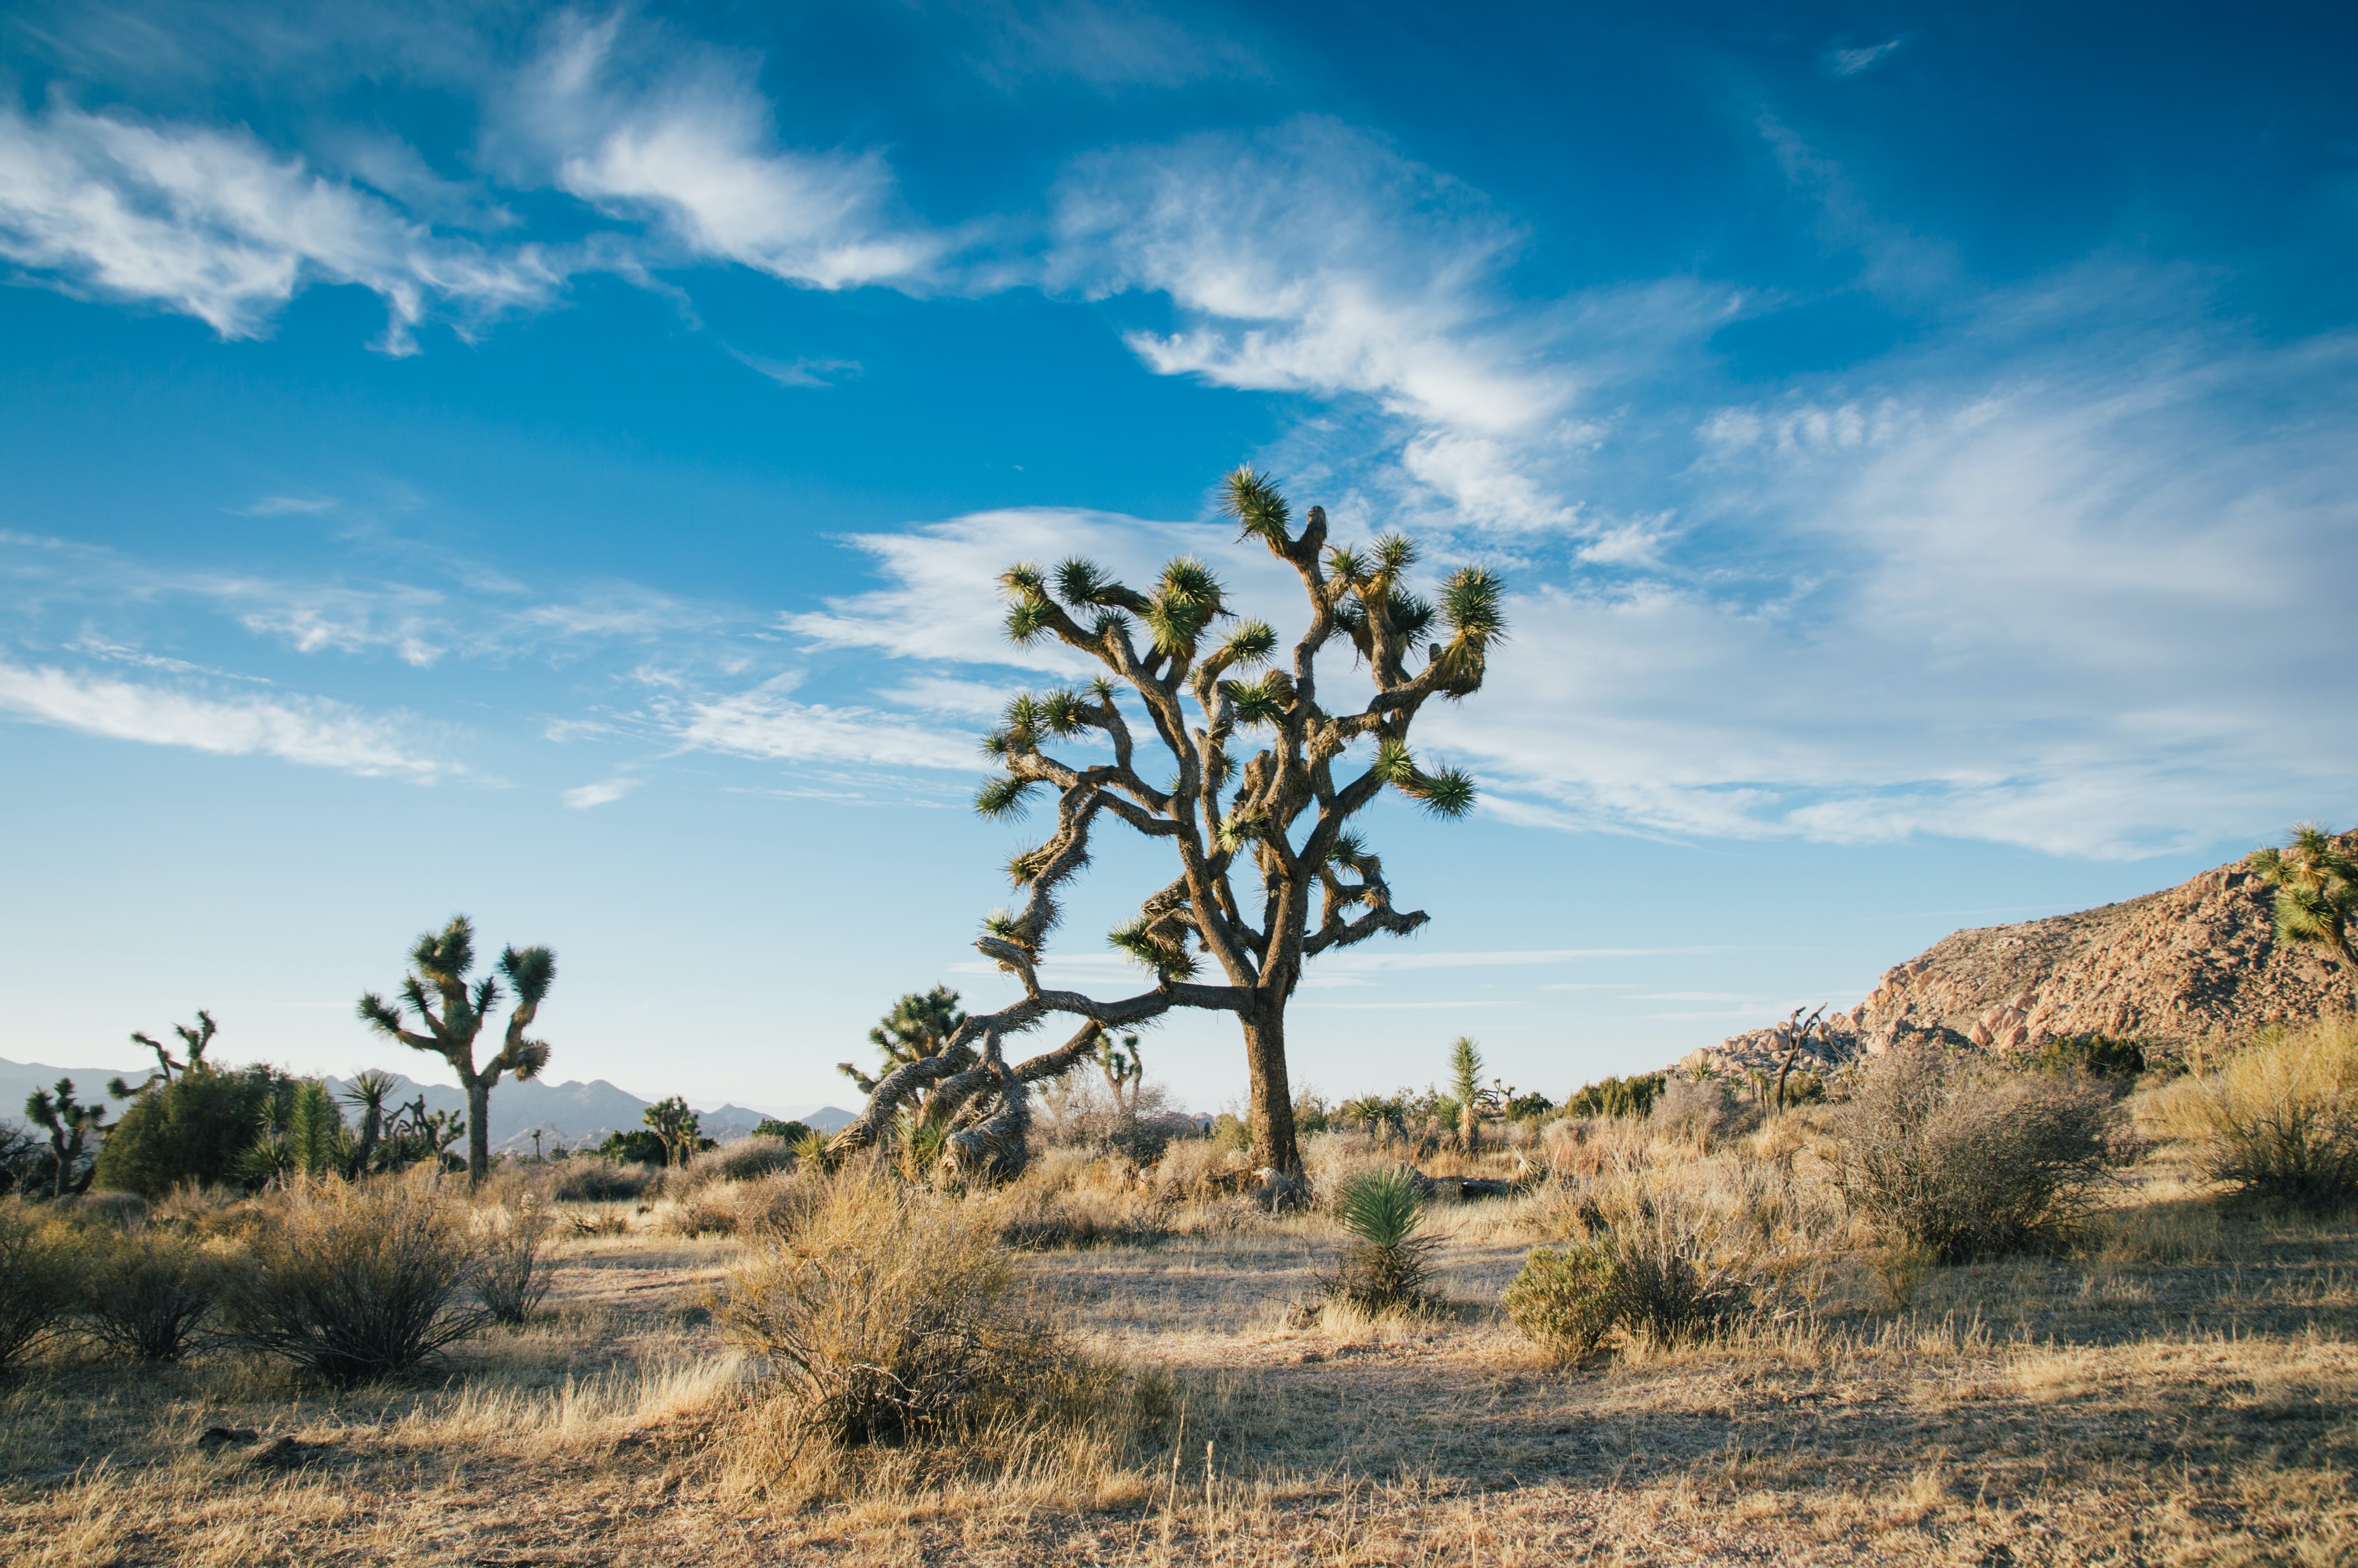 4000x2660 Desert sky royalty free image. Of course, these trees need to be removed